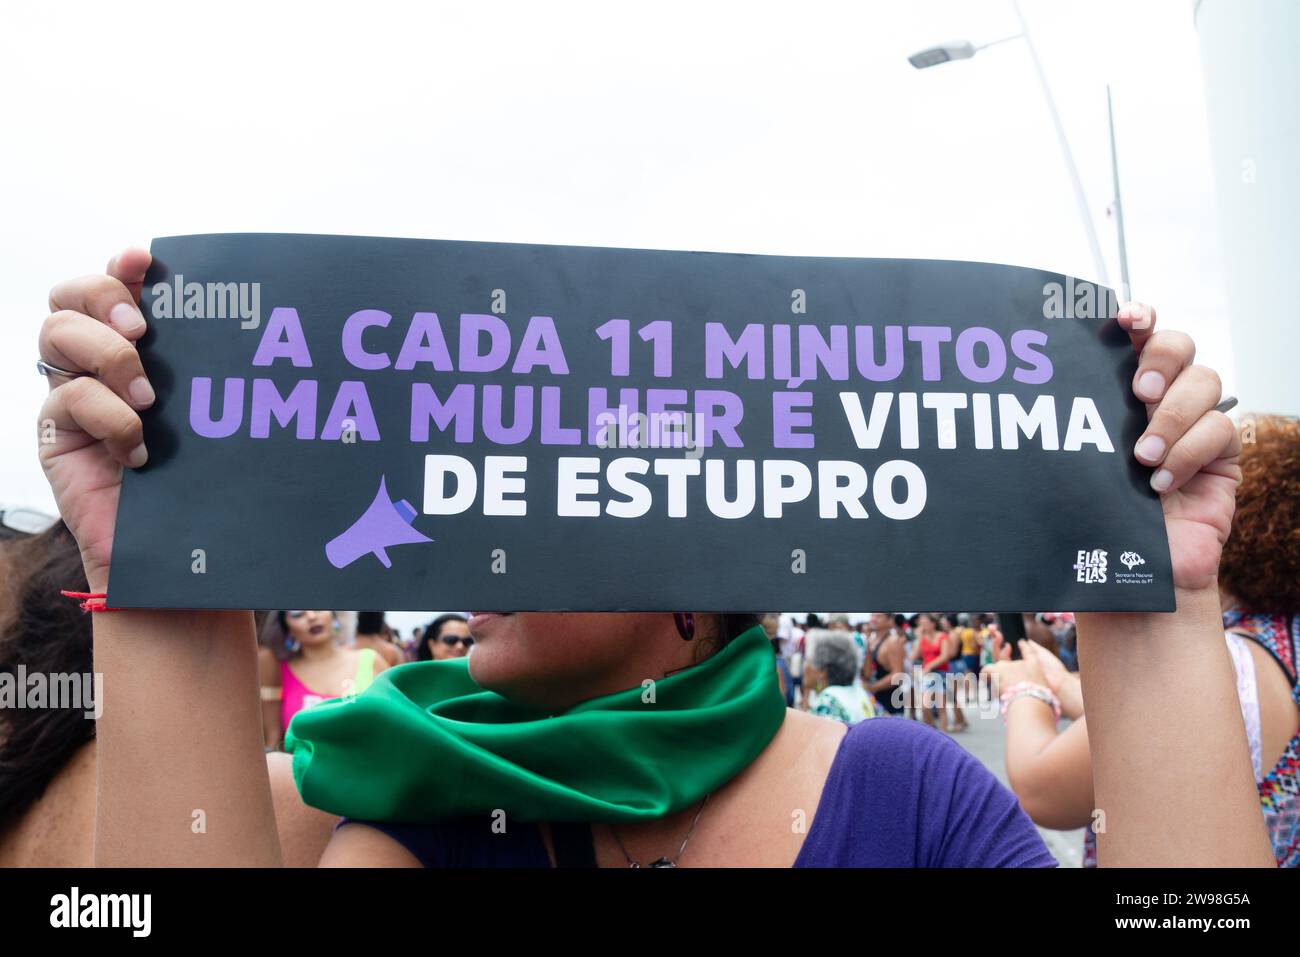 Salvador, Bahia, Brazil - March 08, 2020: Protesters are seen on Women Day protesting against machismo. City of Salvador, Bahia. Stock Photo